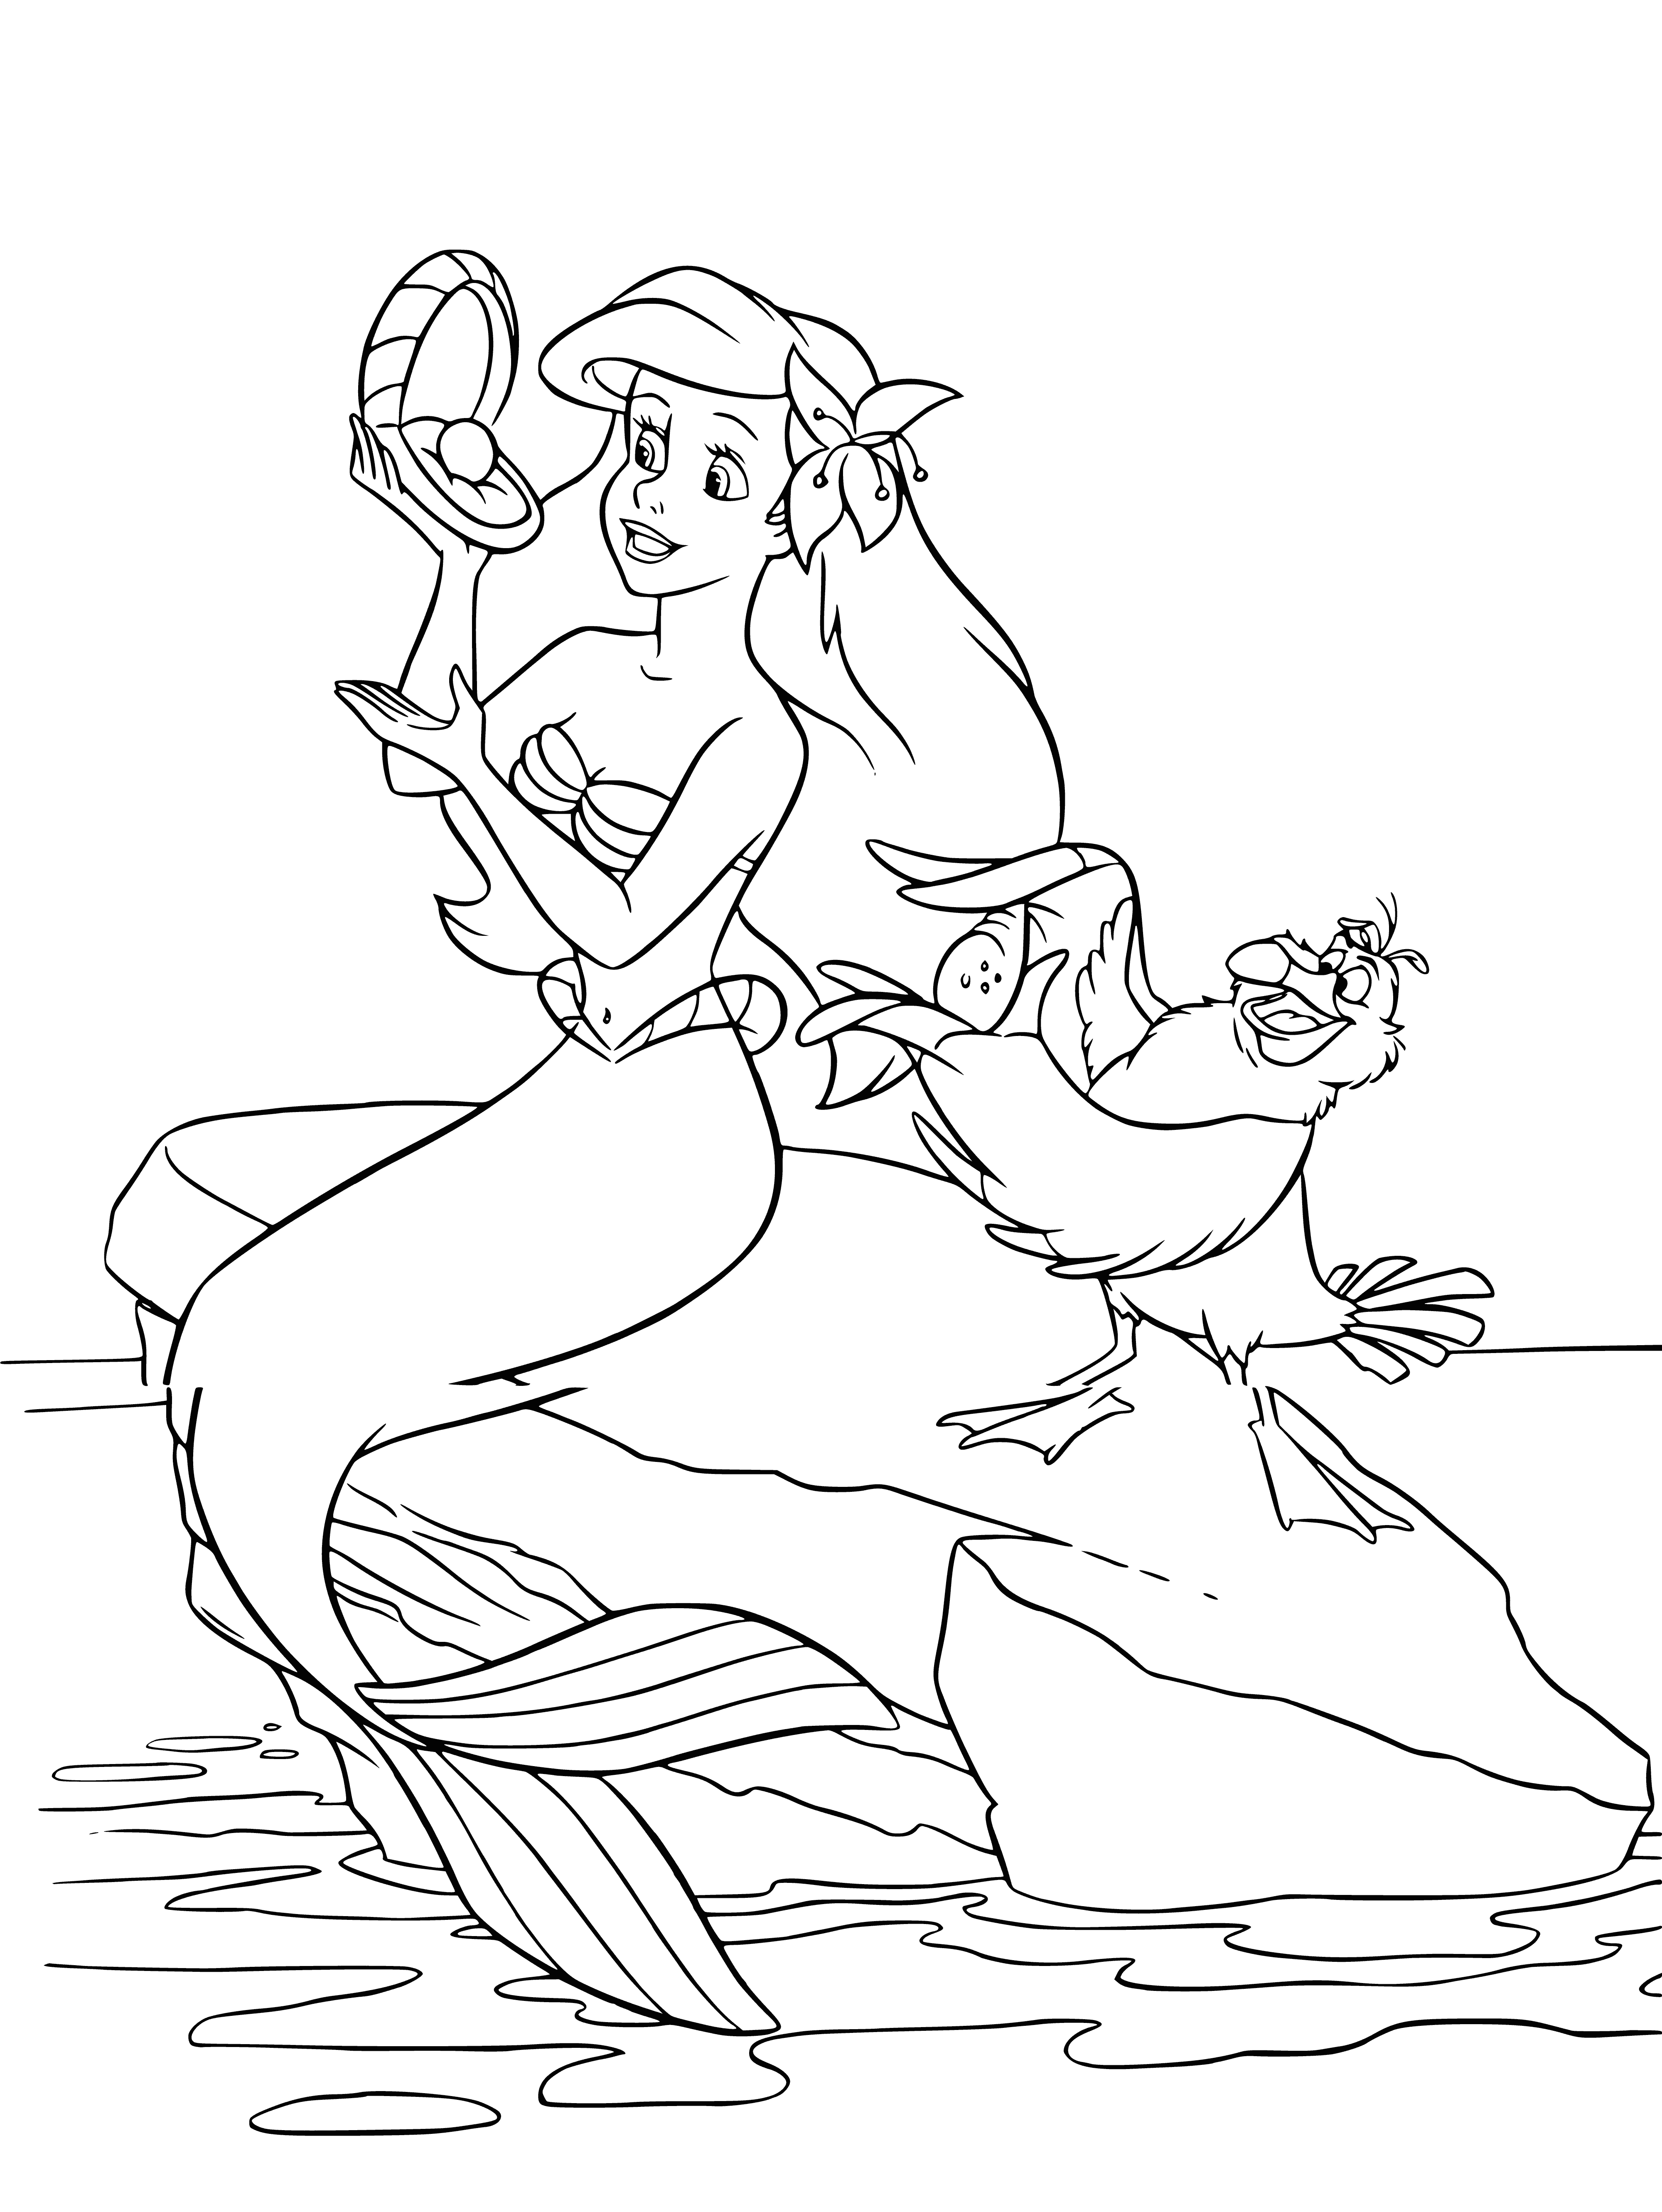 coloring page: Mermaid holds pearl w/ happiness, pearl's white and shiny, perfect and smooth.